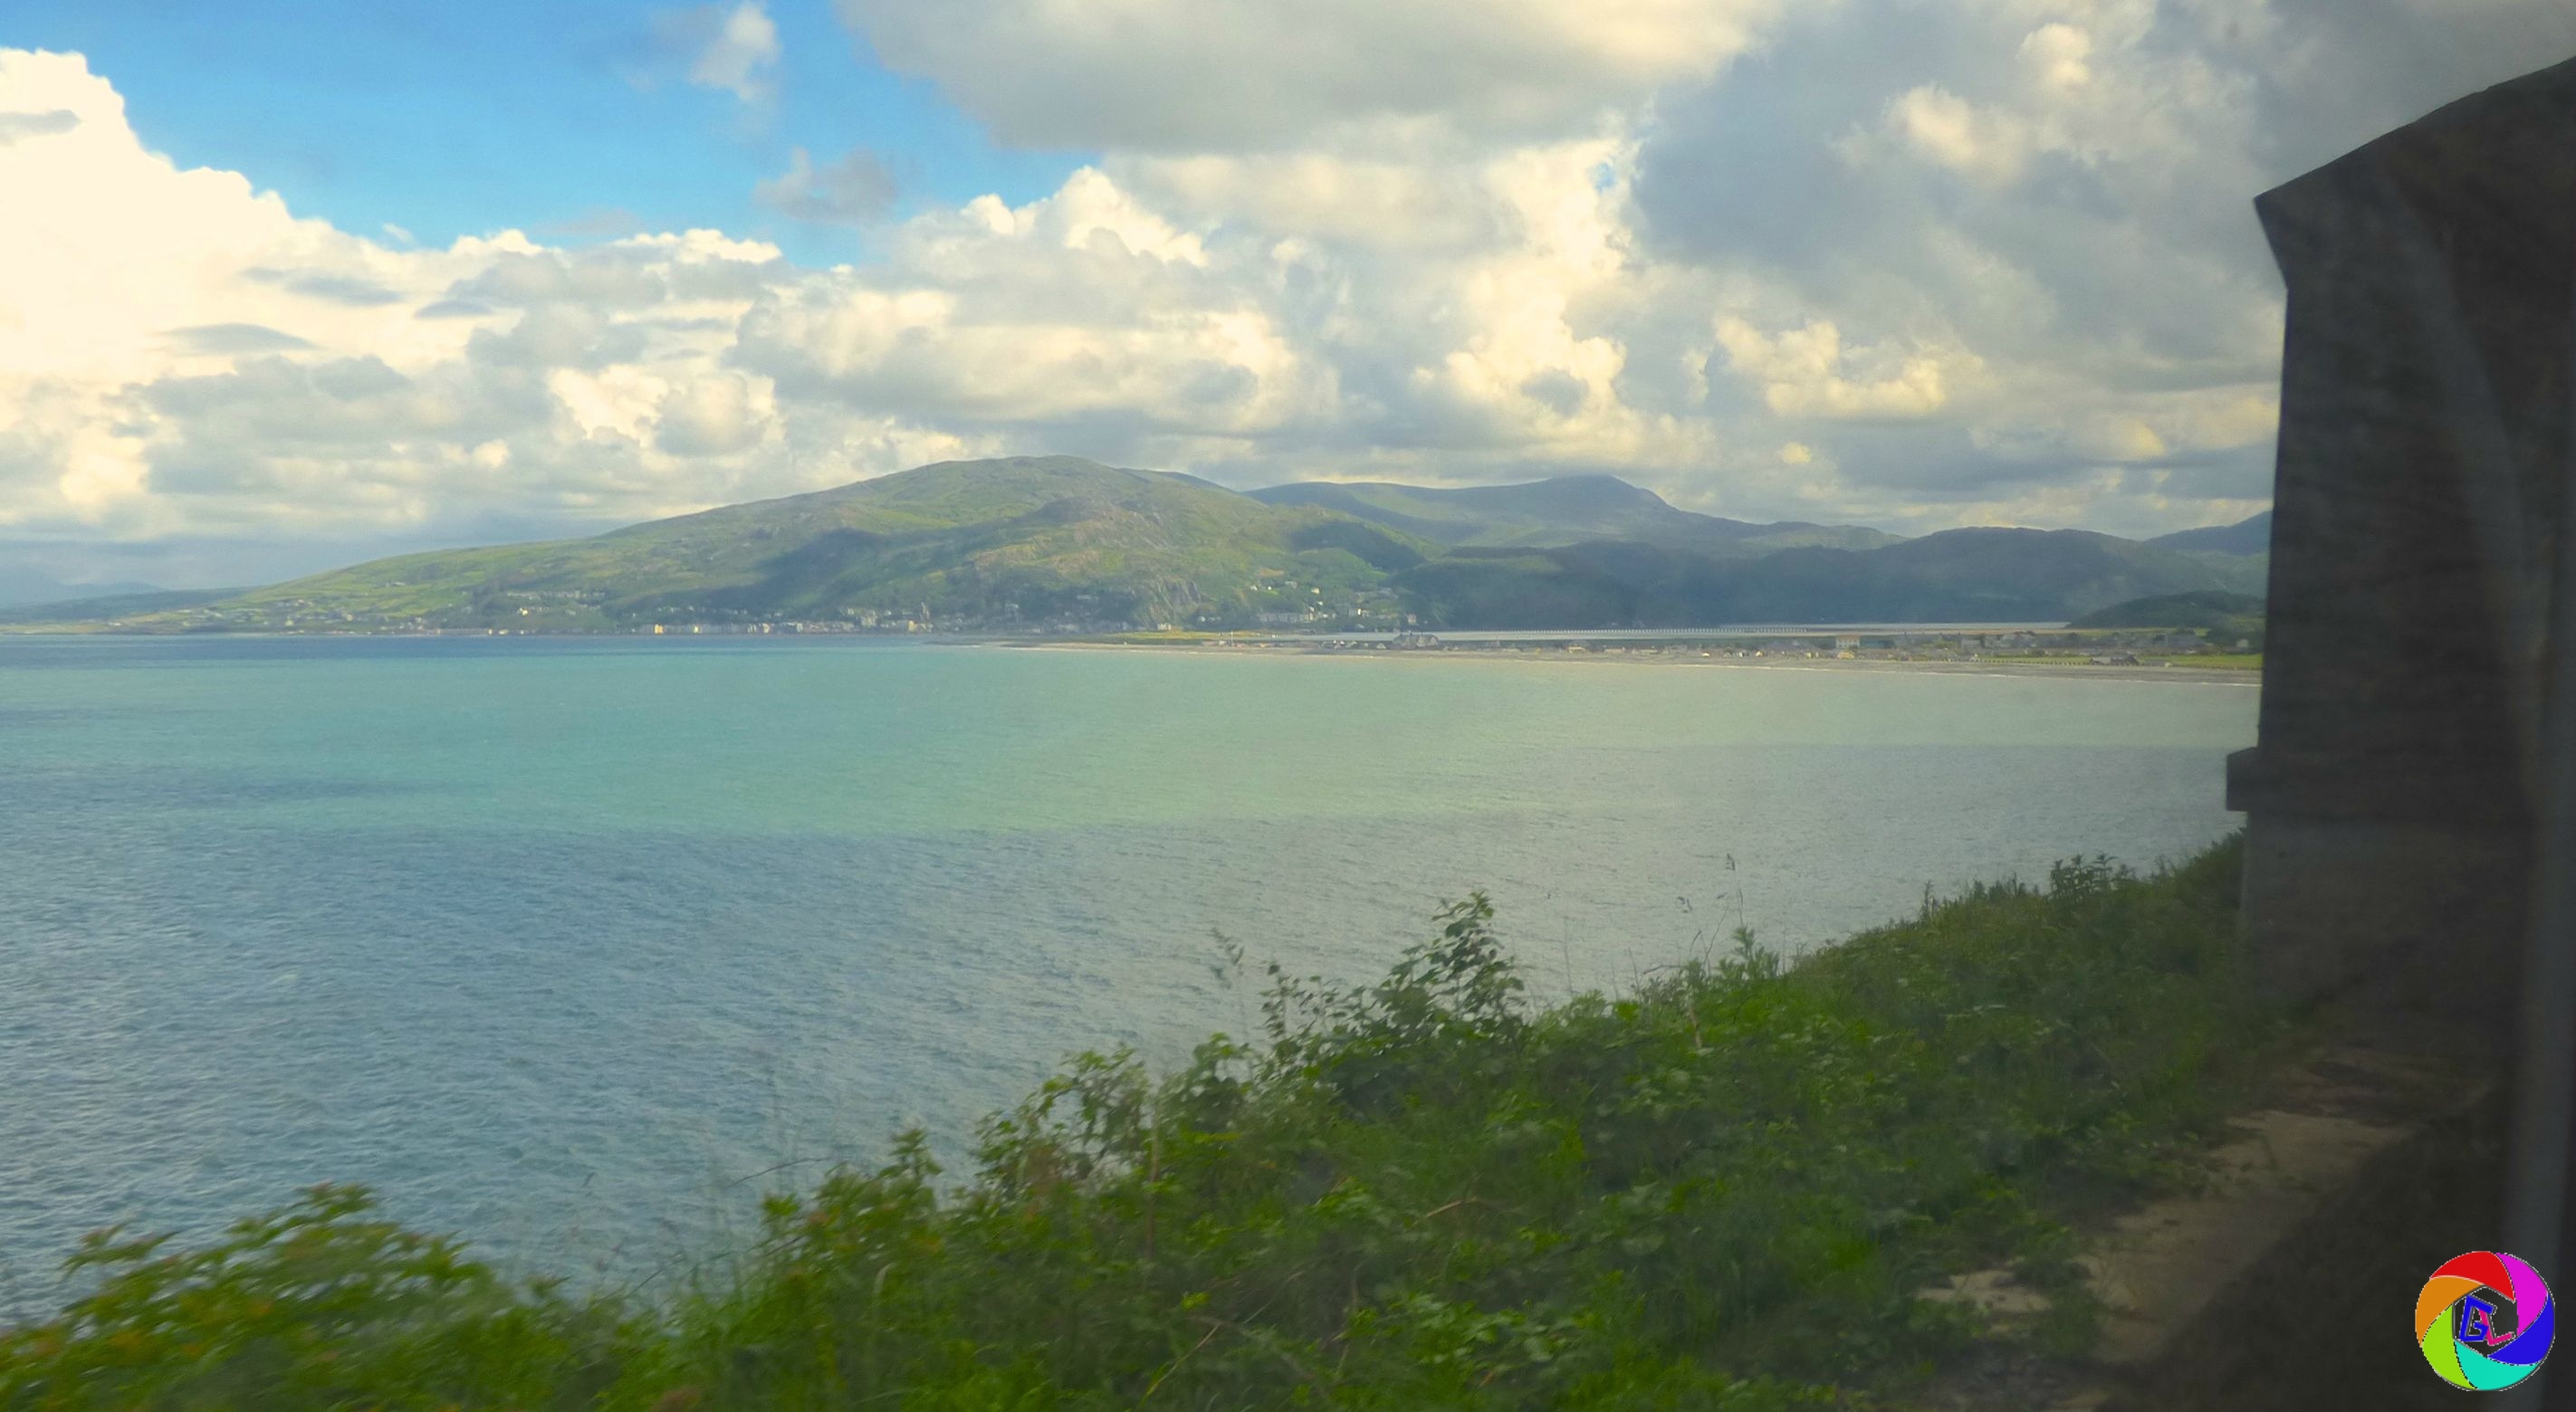 The spectacular approach to Barmouth by train from the south